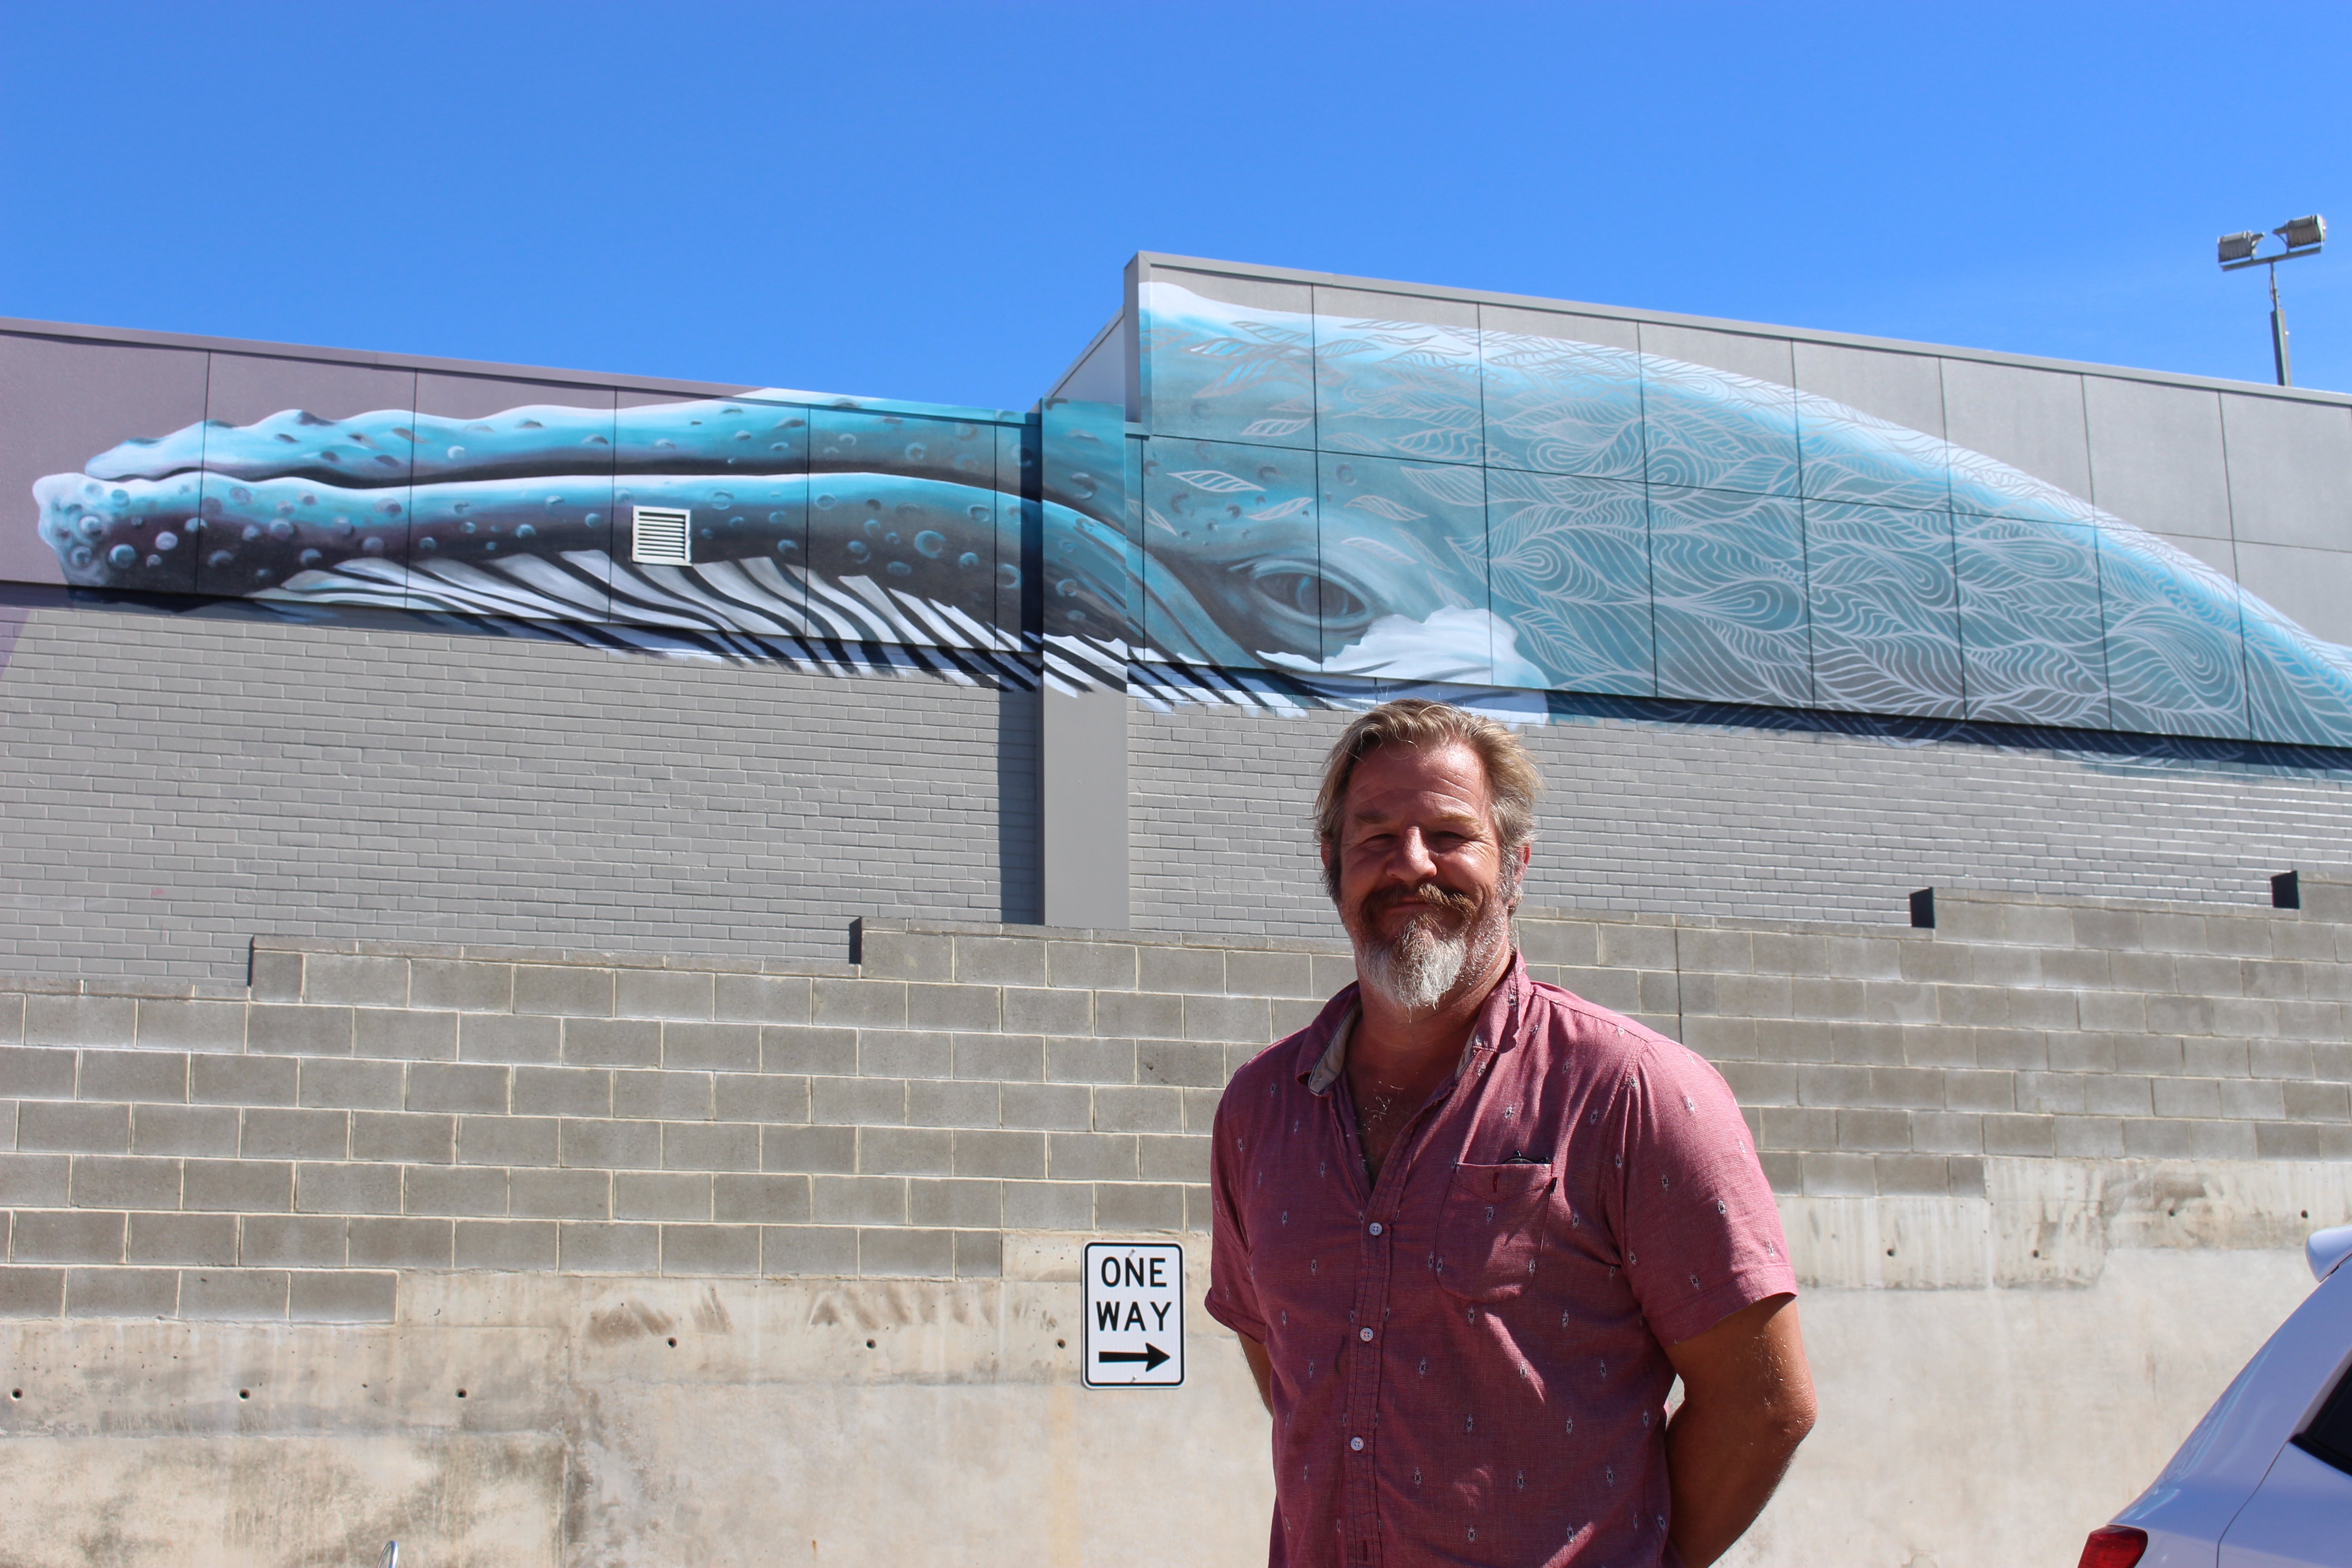 Merimbula whale mural grows as town watches on